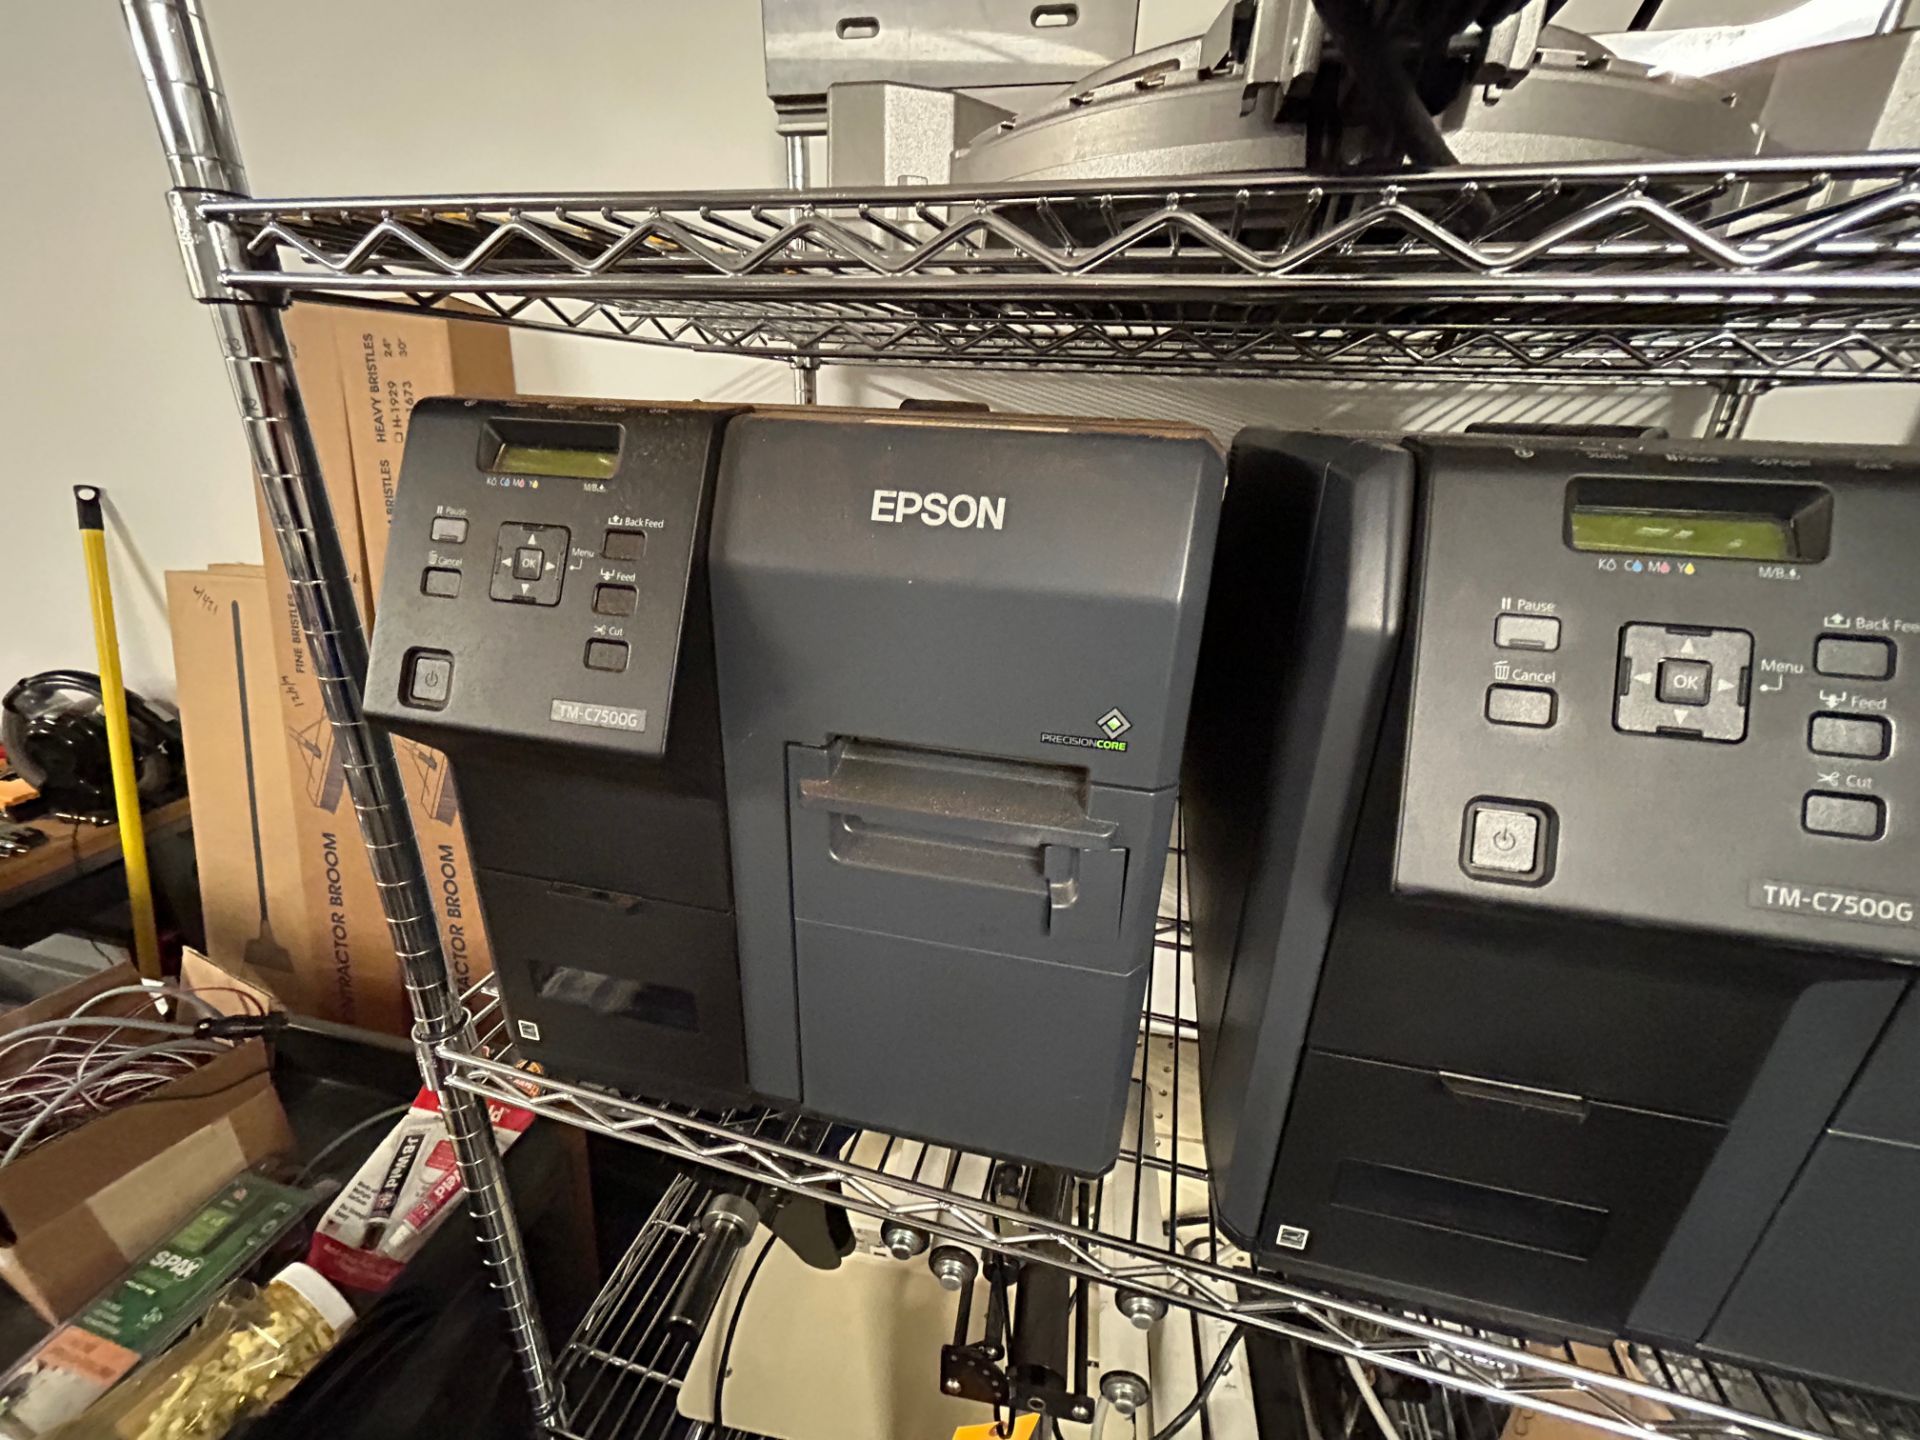 Epson Mdl TM-C7500G, Lot - Consisting of (2) Epson TM-C7500G Color Printers, and (1) Label Dispenser - Image 6 of 6